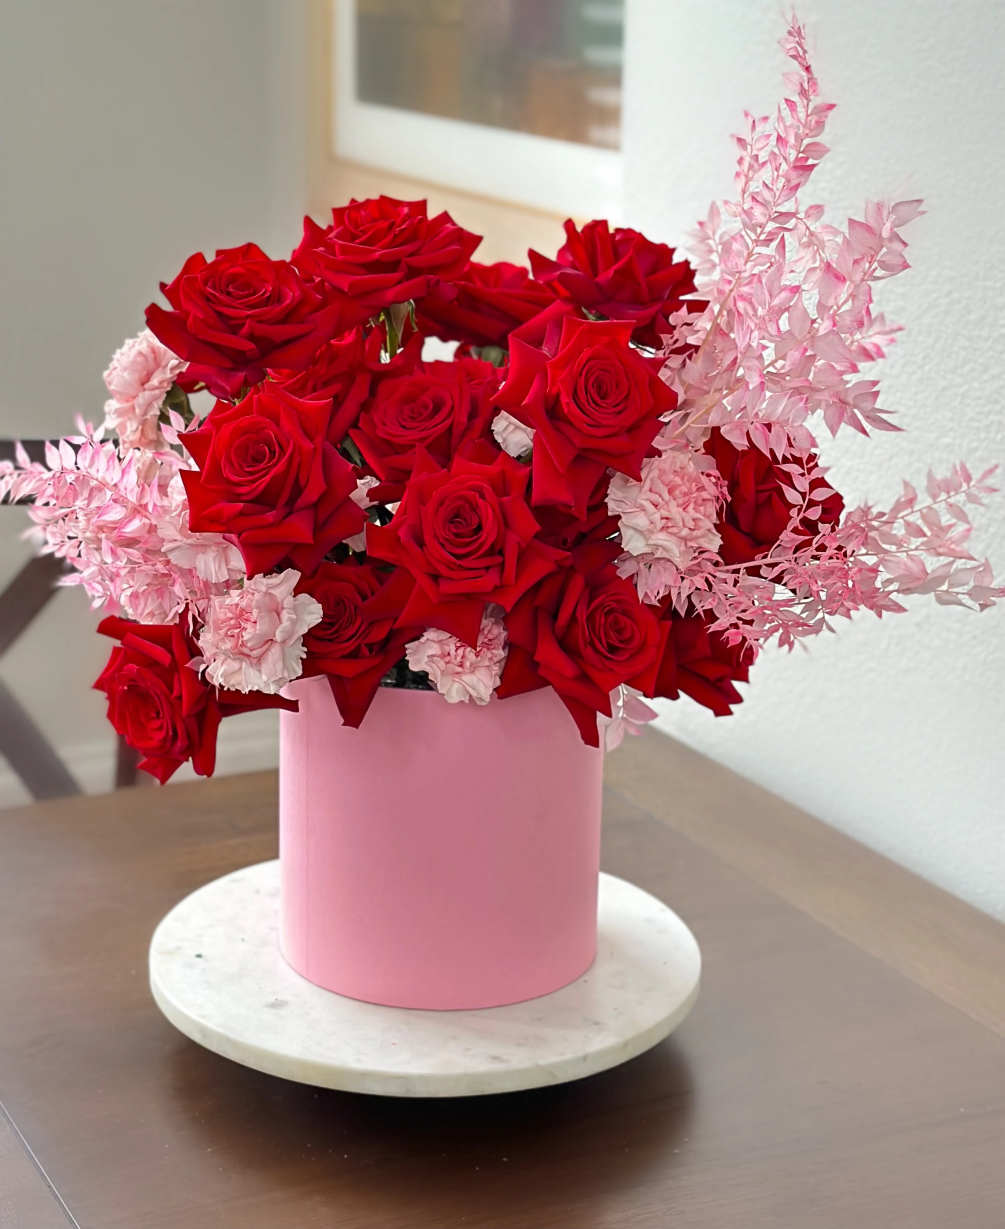 Large red roses, soft pink dianthus, and elegant ruskus will not leave